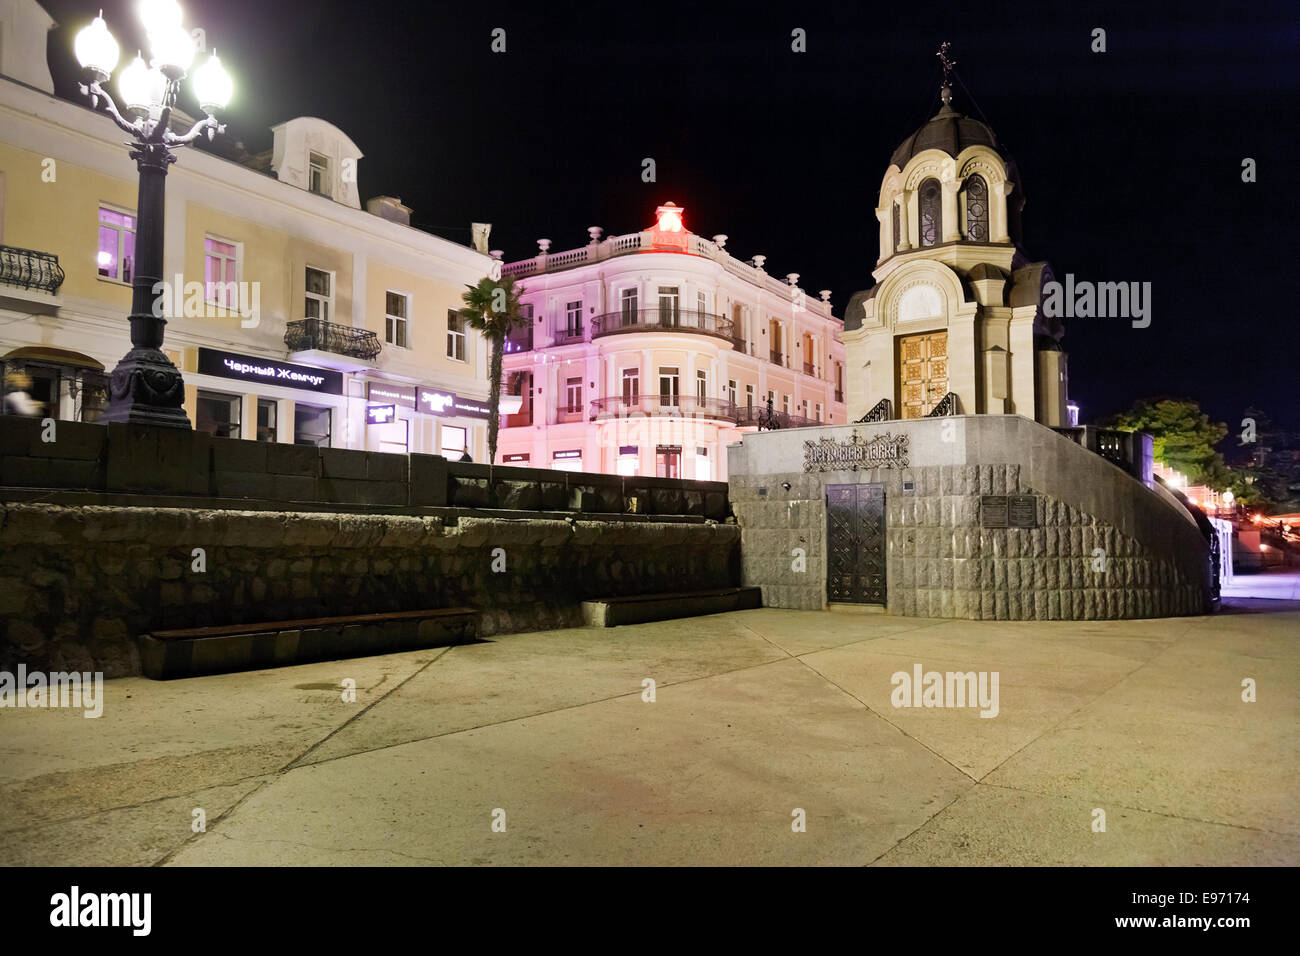 YALTA, RUSSIA - OCTOBER 2, 2014: chapel on quay in Yalta city in night. Yalta is resort city on the north coast of the Black Sea Stock Photo